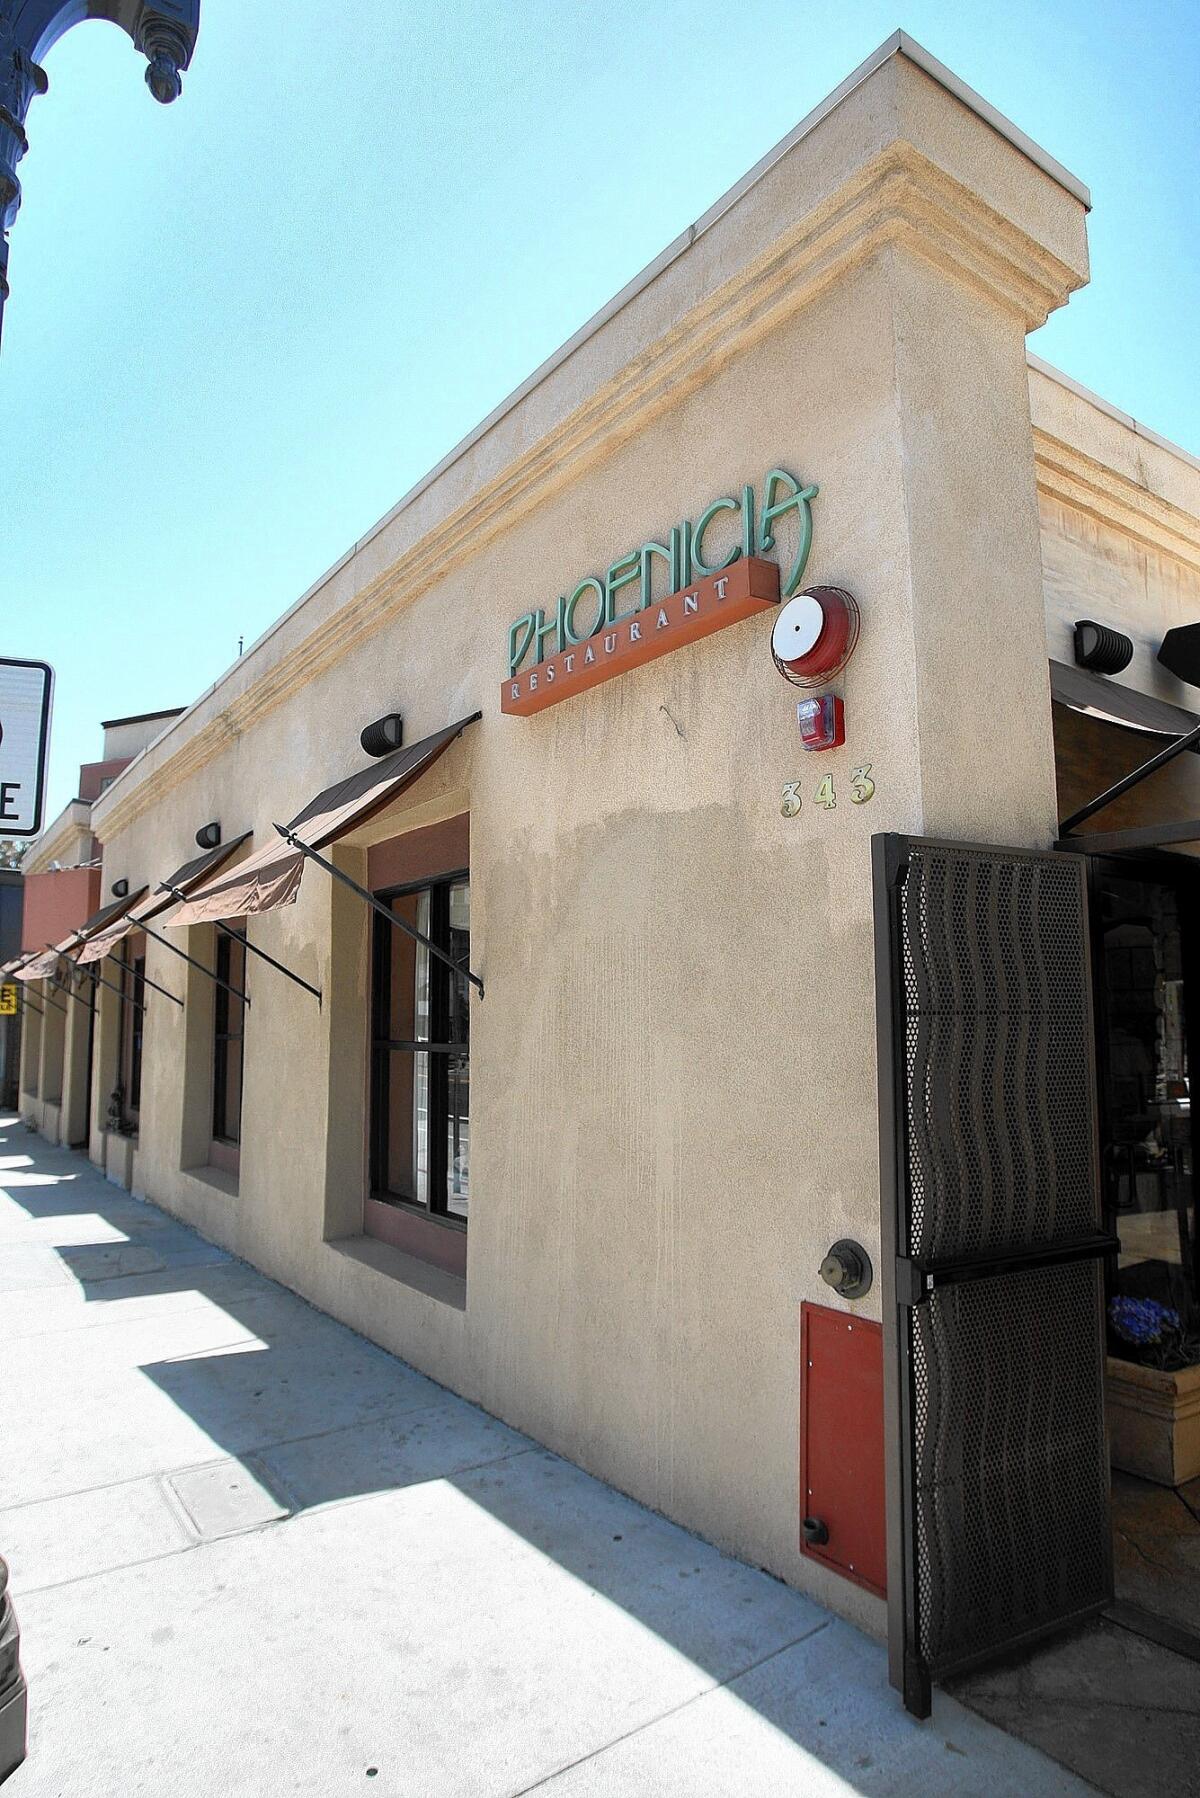 Phoenicia Restaurant in Glendale on Wednesday, June 4, 2014. The restaurant, owned by a city commissioner, operated for months without a certificate of occupancy permit and officials did nothing about it, even when a resident called the police to complain. The restaurant is also at the center of a controversy over permitted parking with residents on Lexington Avenue.